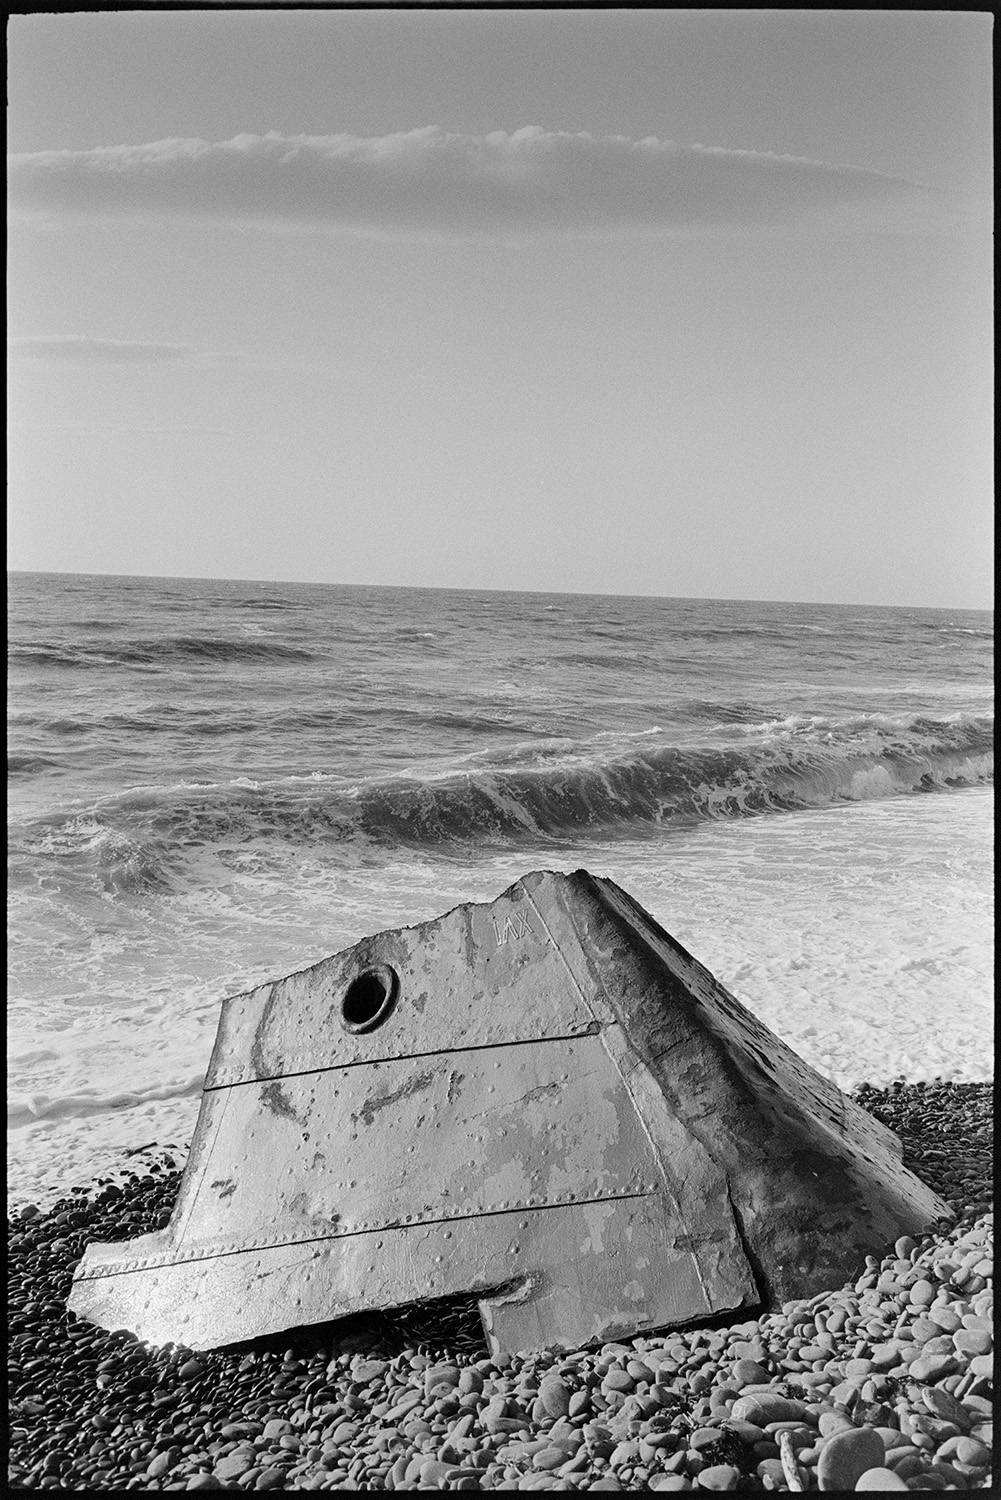 Evening seascape with section of wrecked boat on pebble beach. 
[Part of a wrecked boat on the pebble beach by the shoreline at Bideford.]